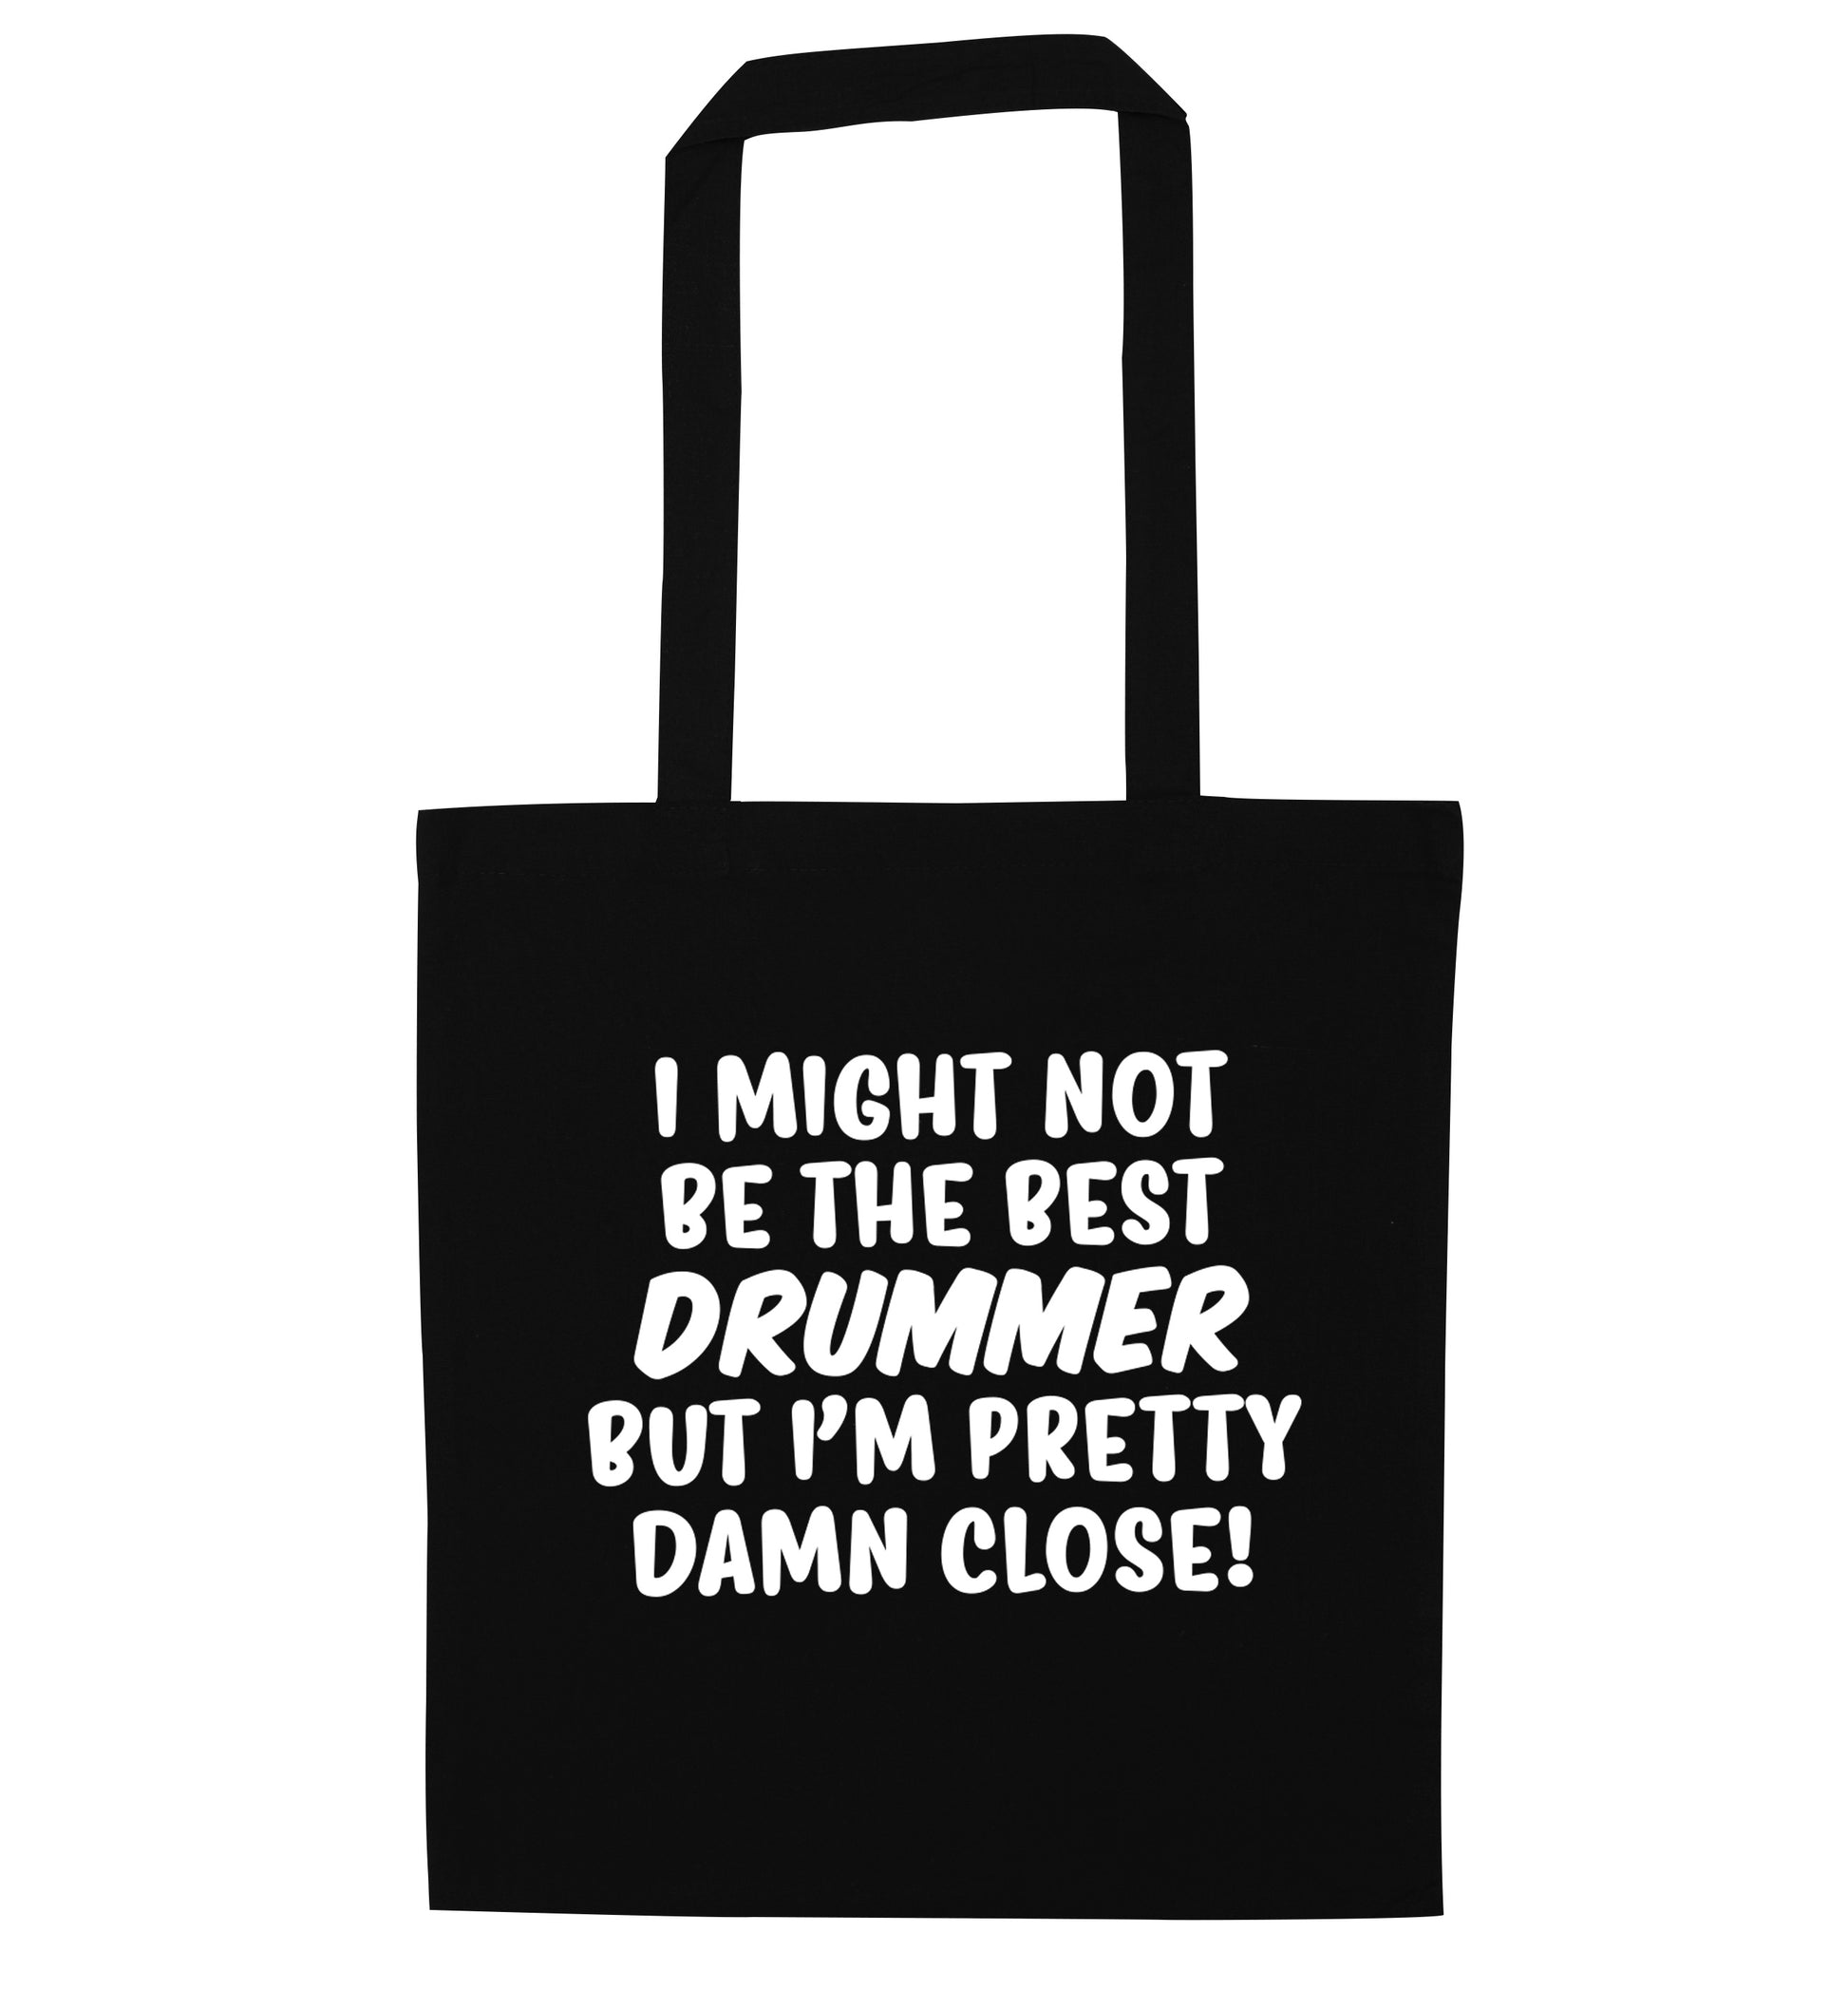 I might not be the best drummer but I'm pretty close! black tote bag